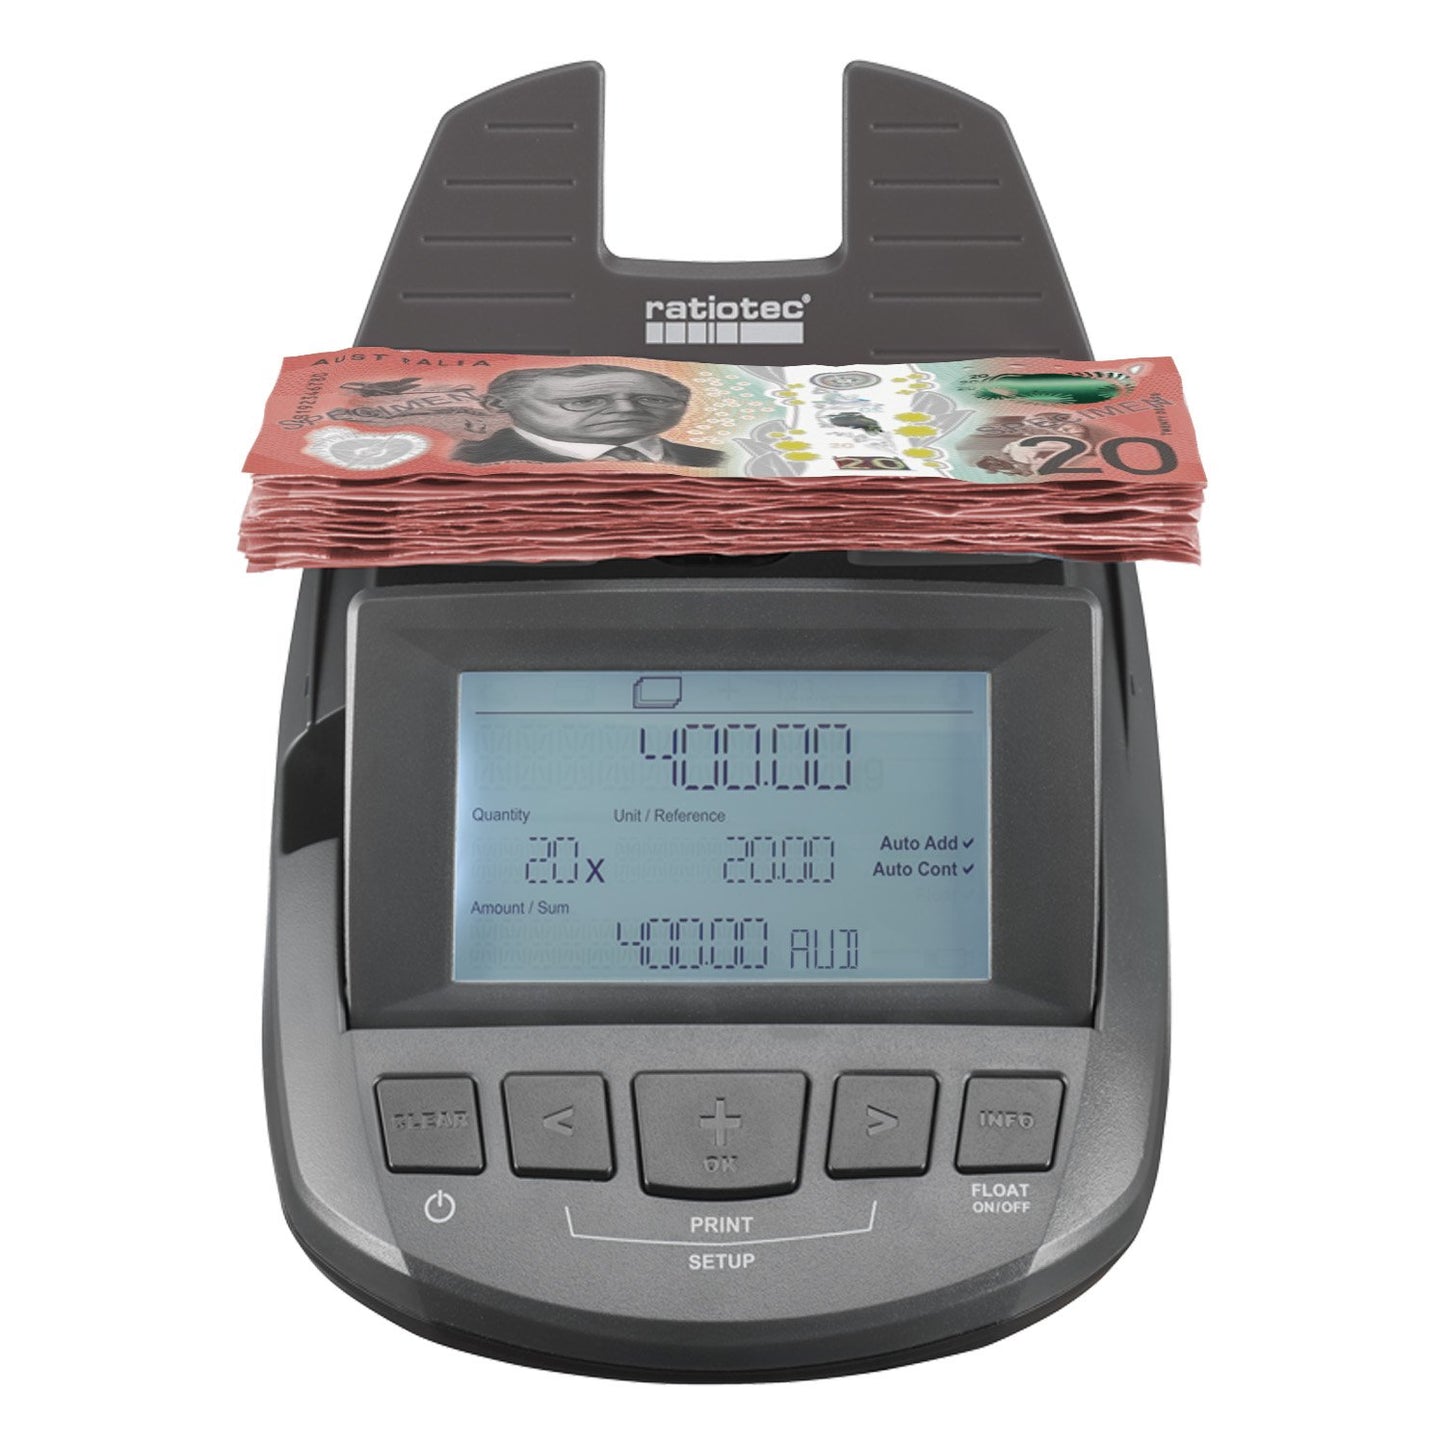 Digital Electronic Money Note Coin Counter Scales